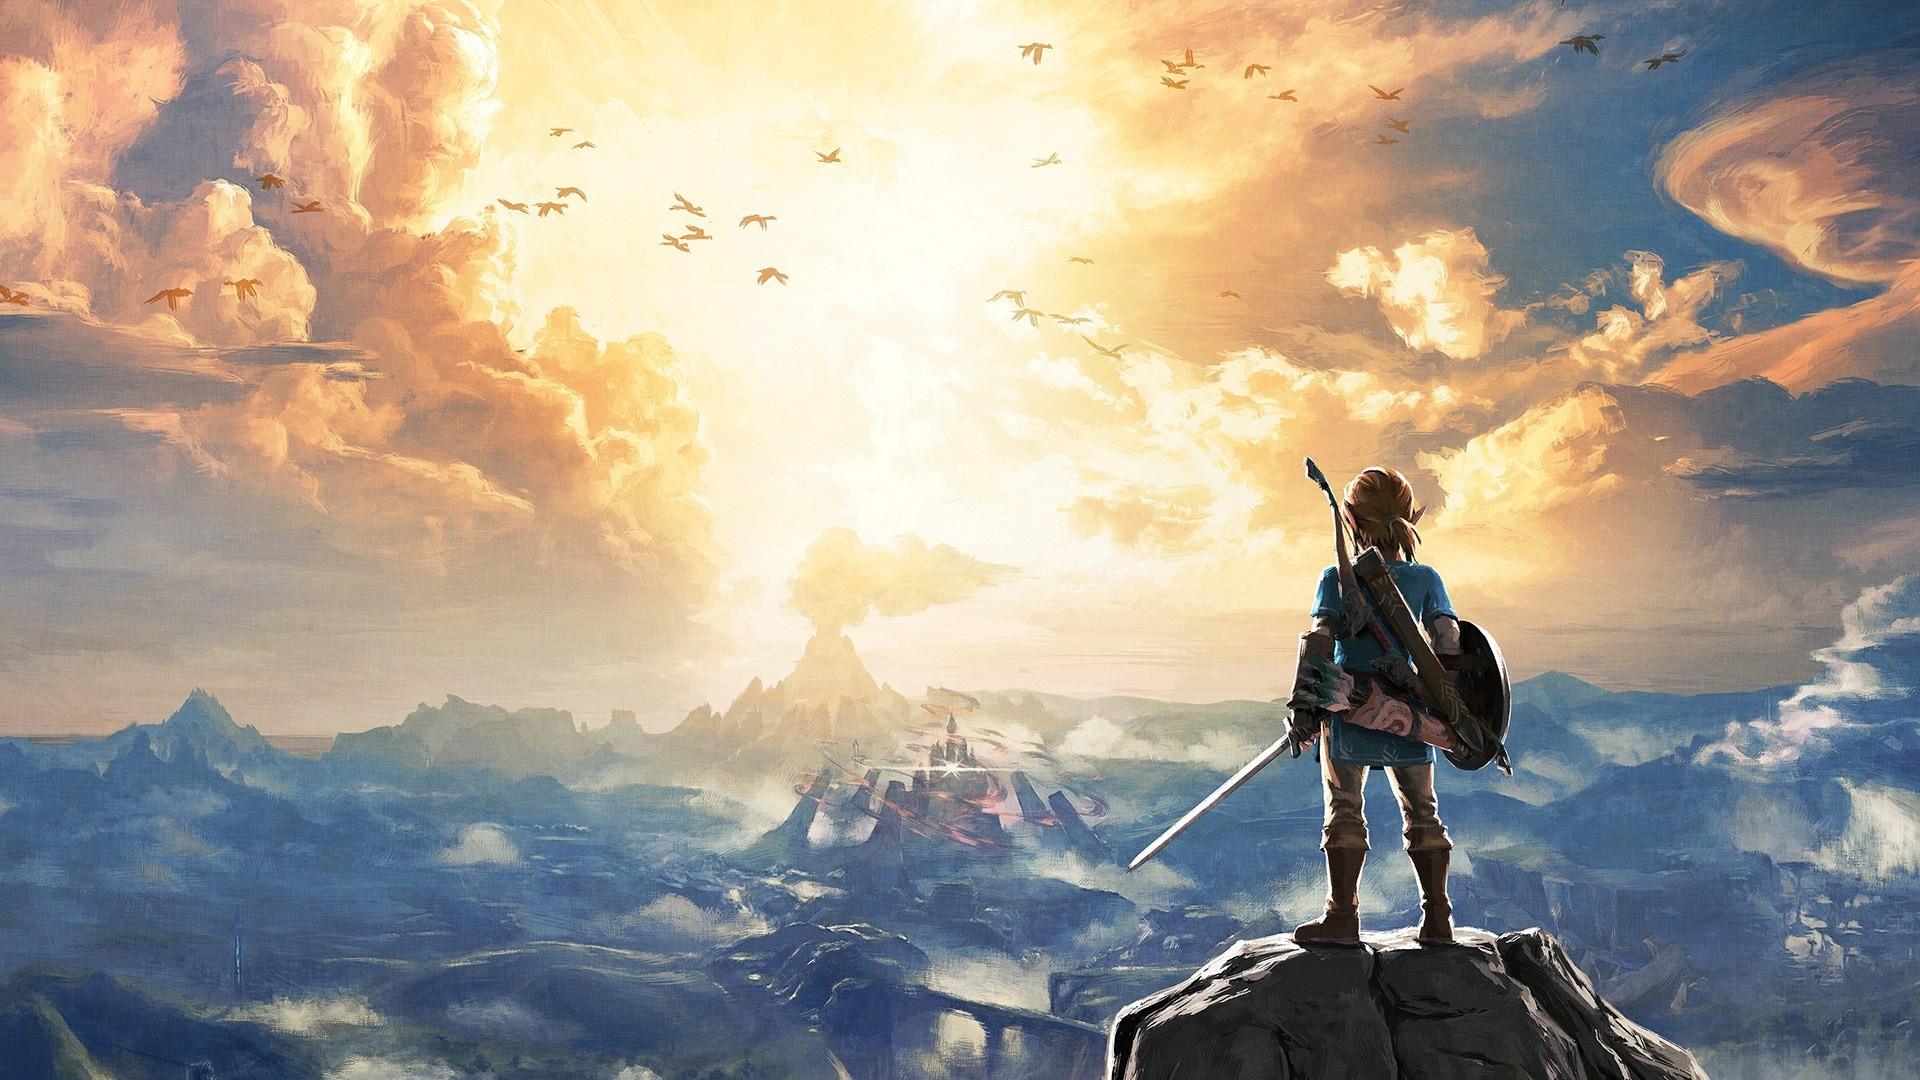 The Legend of Zelda: Breath of the Wild HD Wallpaper and Background